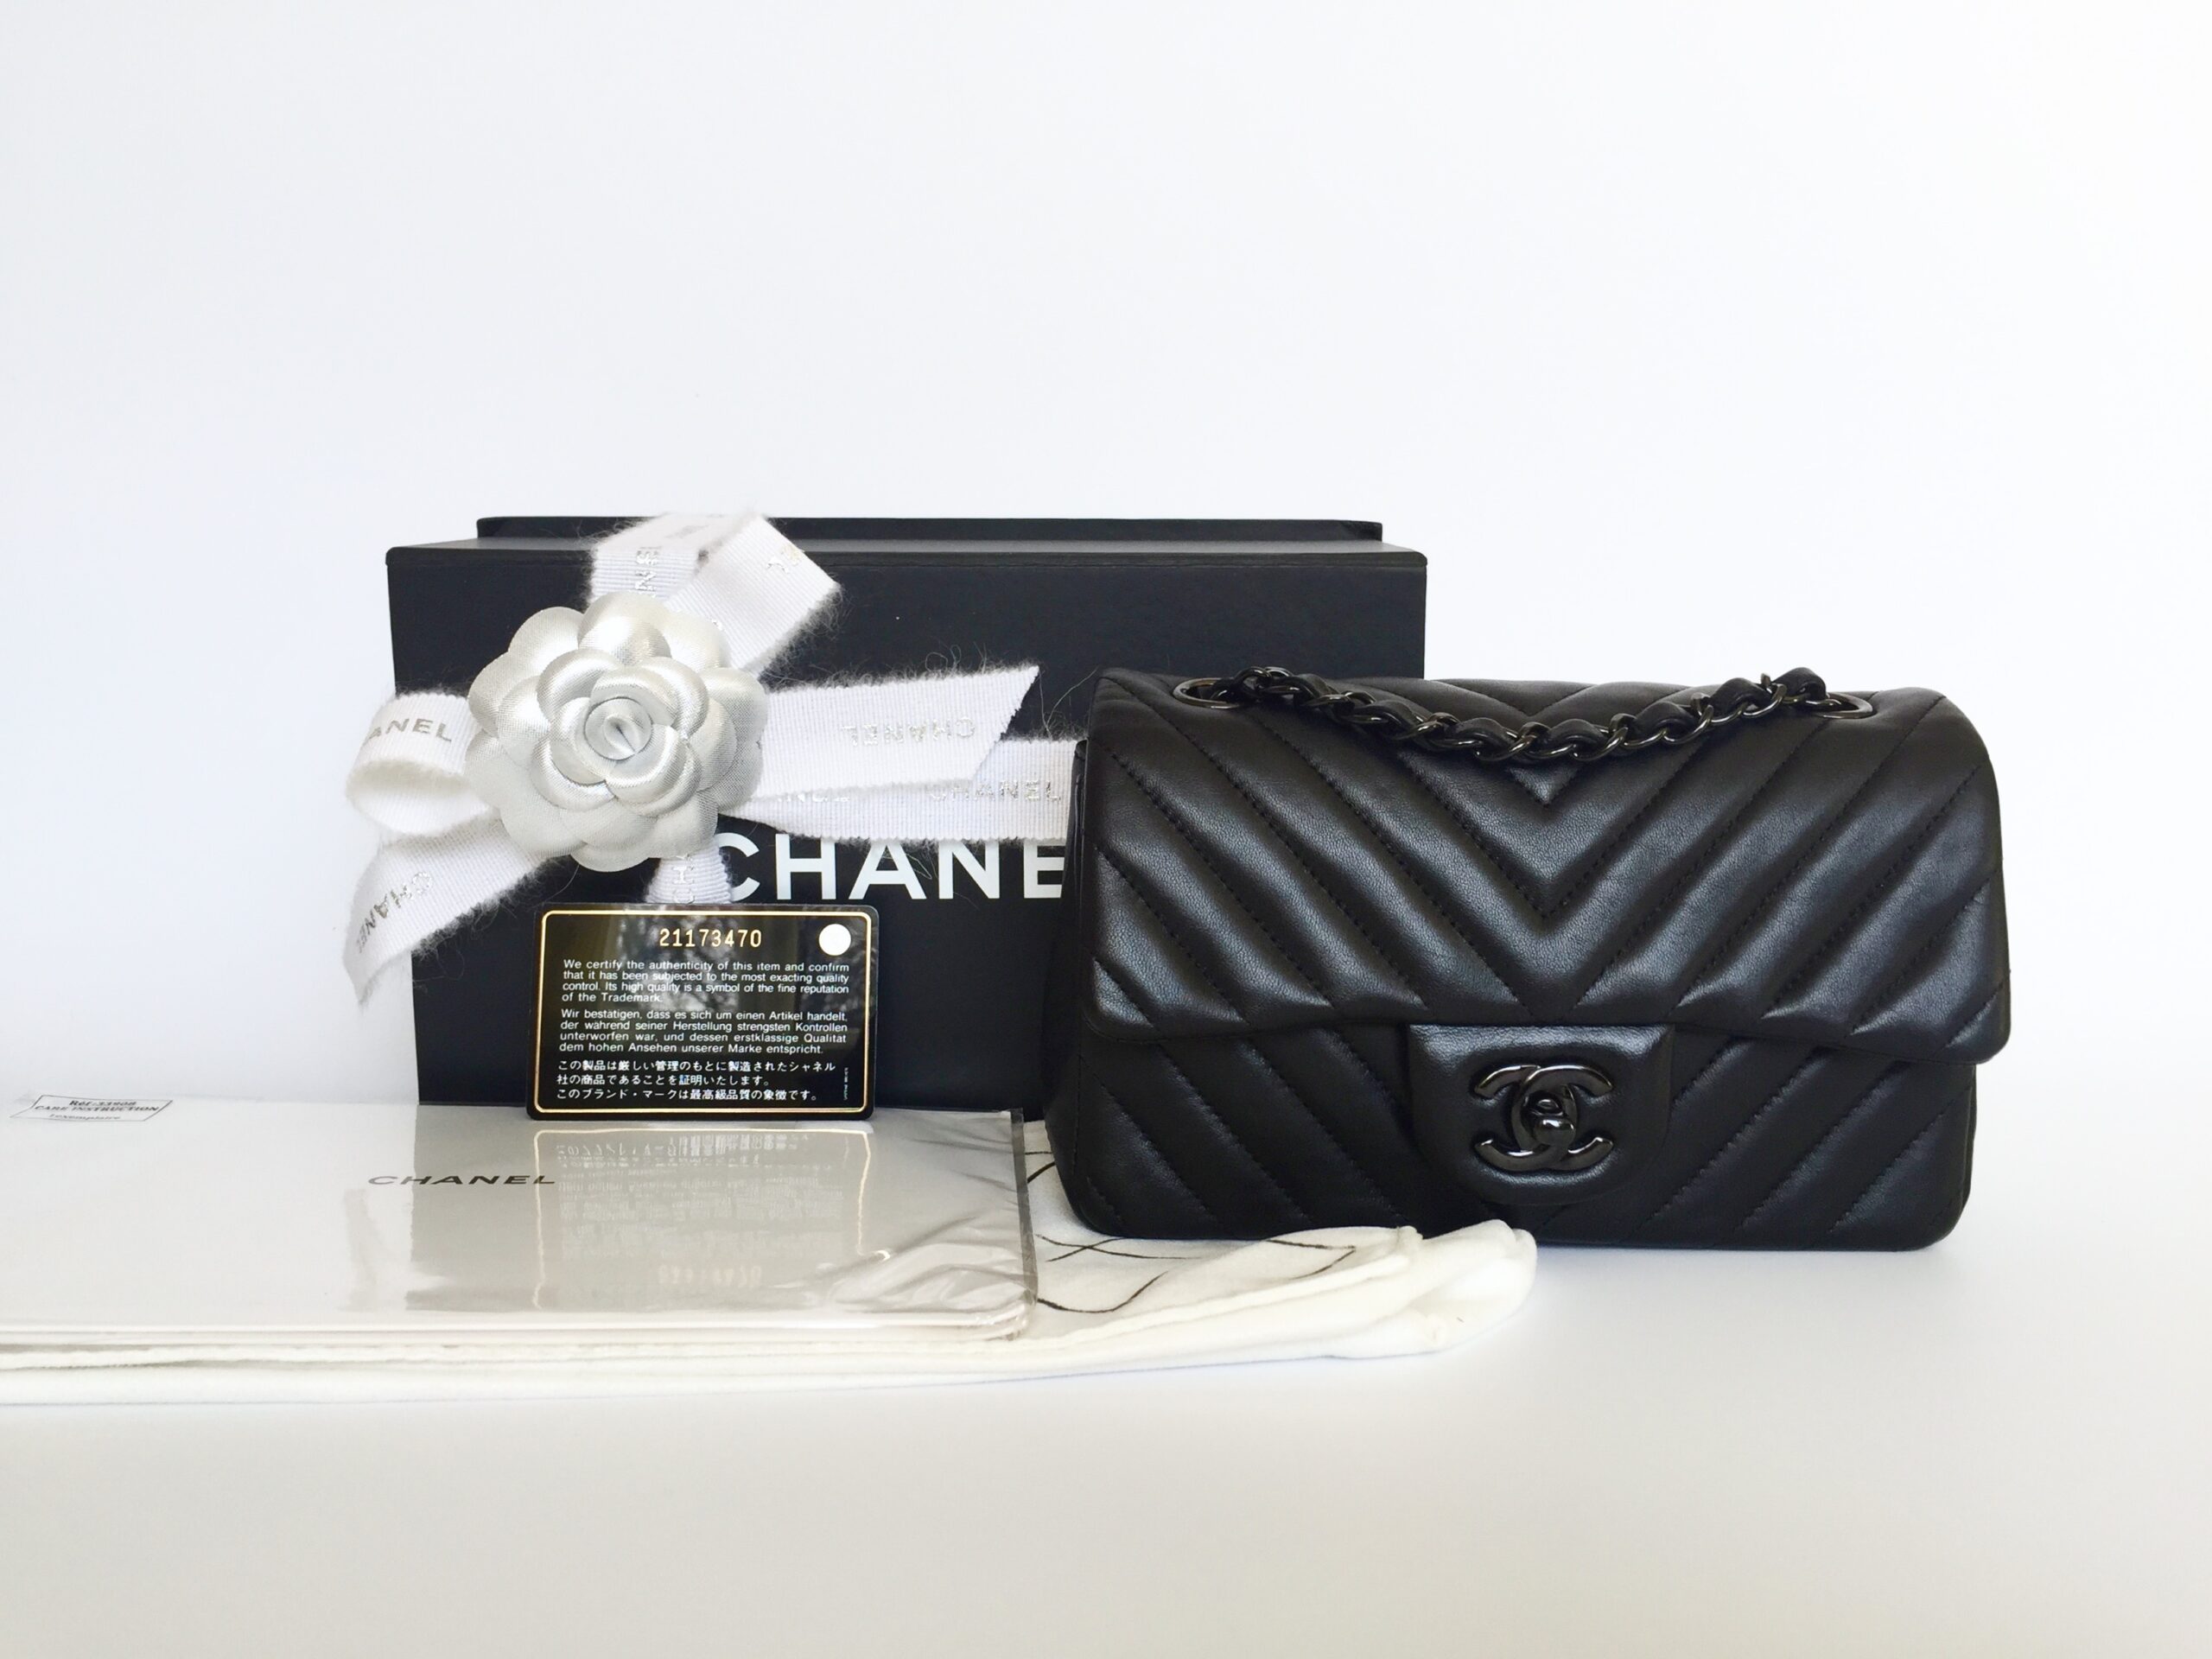 chanel black and gold